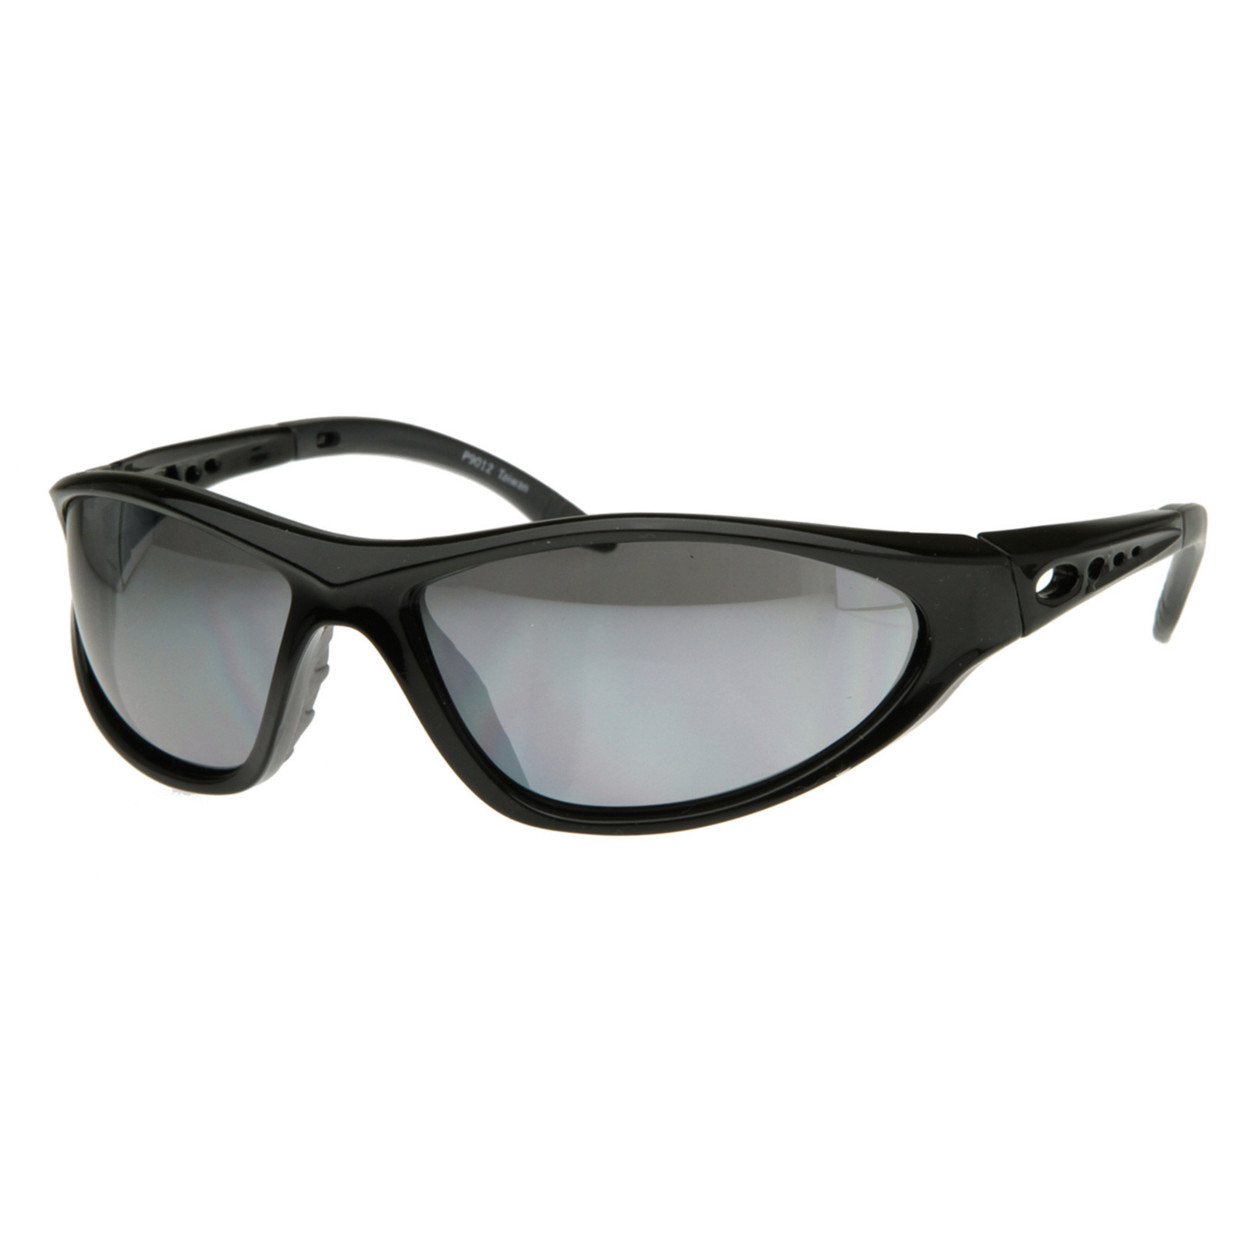 Aggressive TR-90 Material Sports Frame Sunglasses With Strap - 8278 - Black